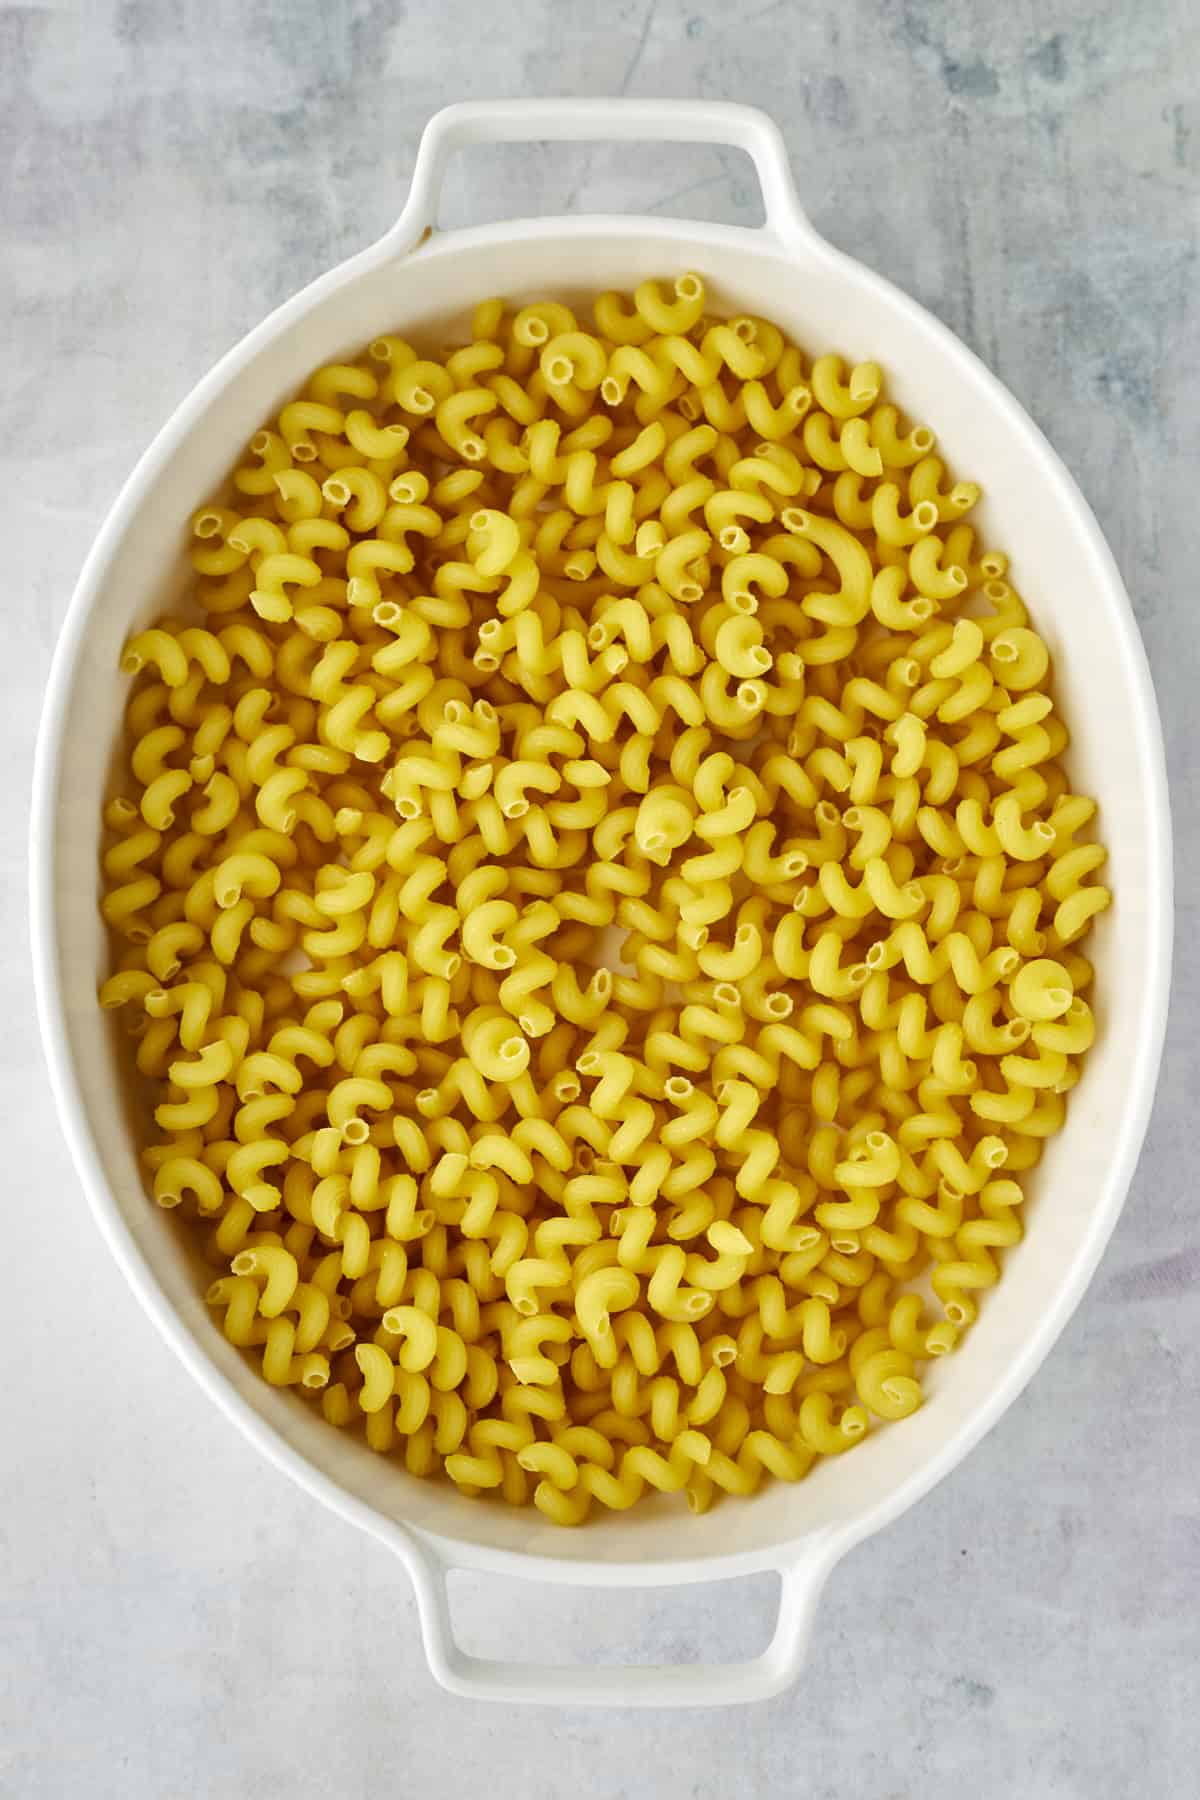 cavatappi noodles in an oval baking dish